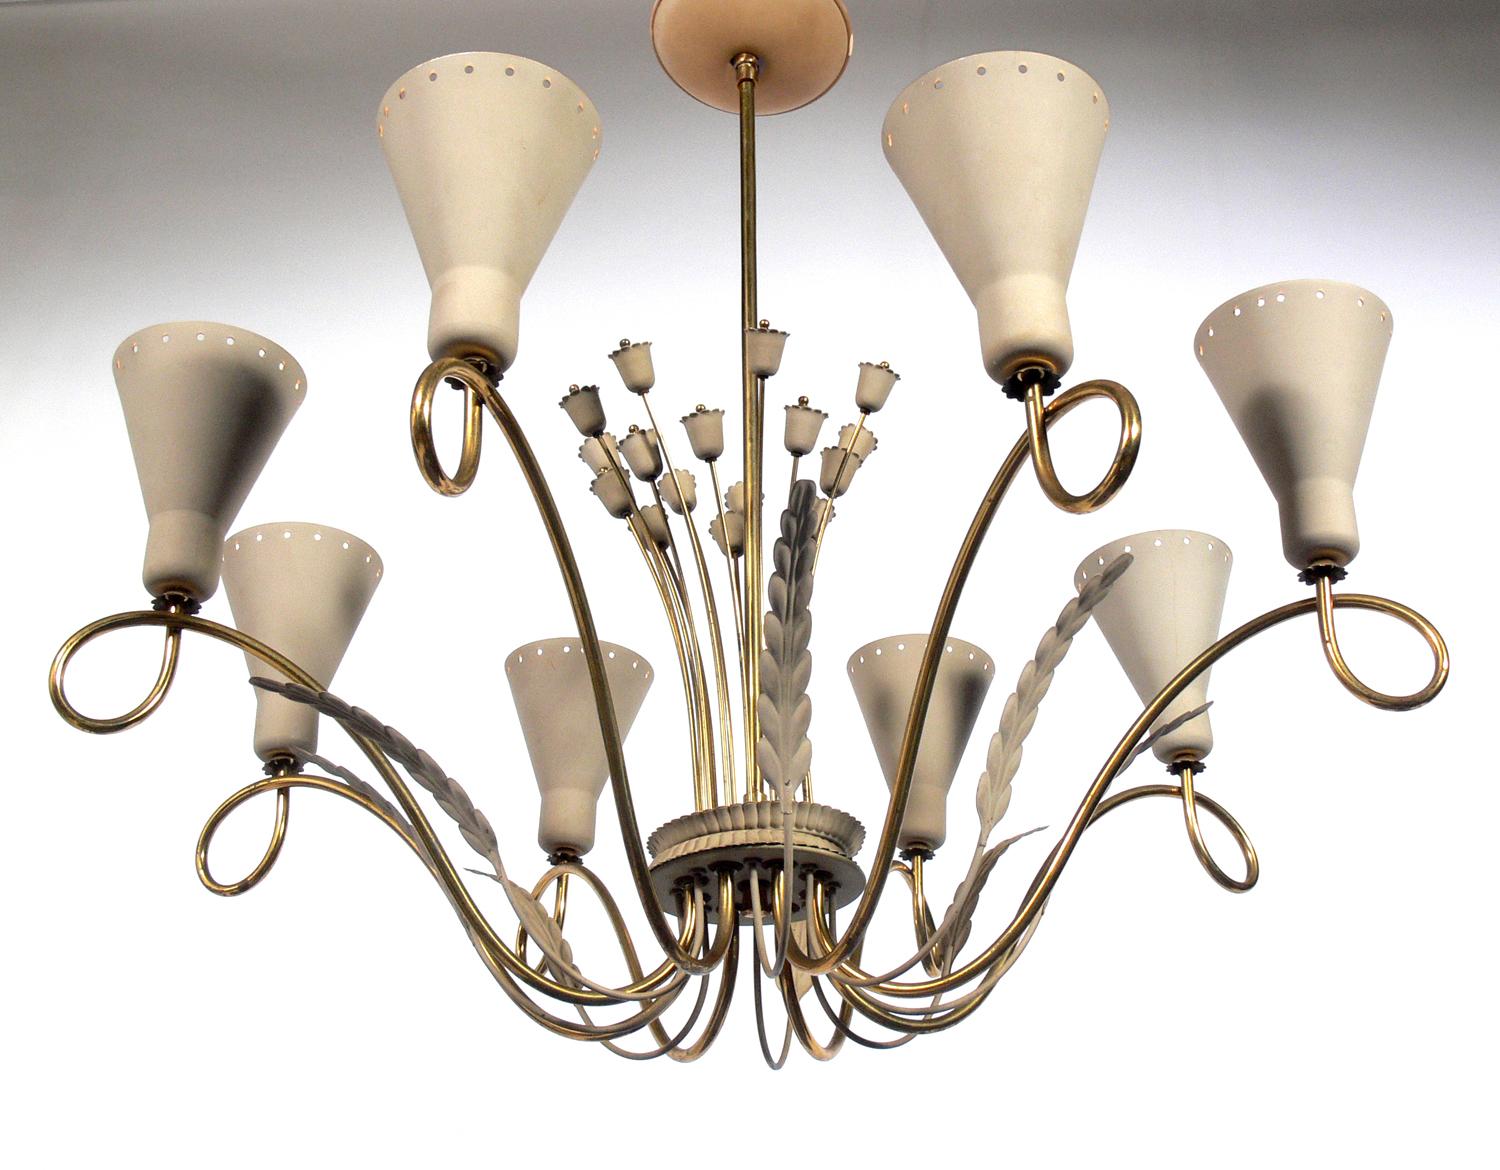 Elegant midcentury chandelier in the manner of Paavo Tynell, circa 1950s. Retains it's original greige color enameled shades and original warm patina to the brass.